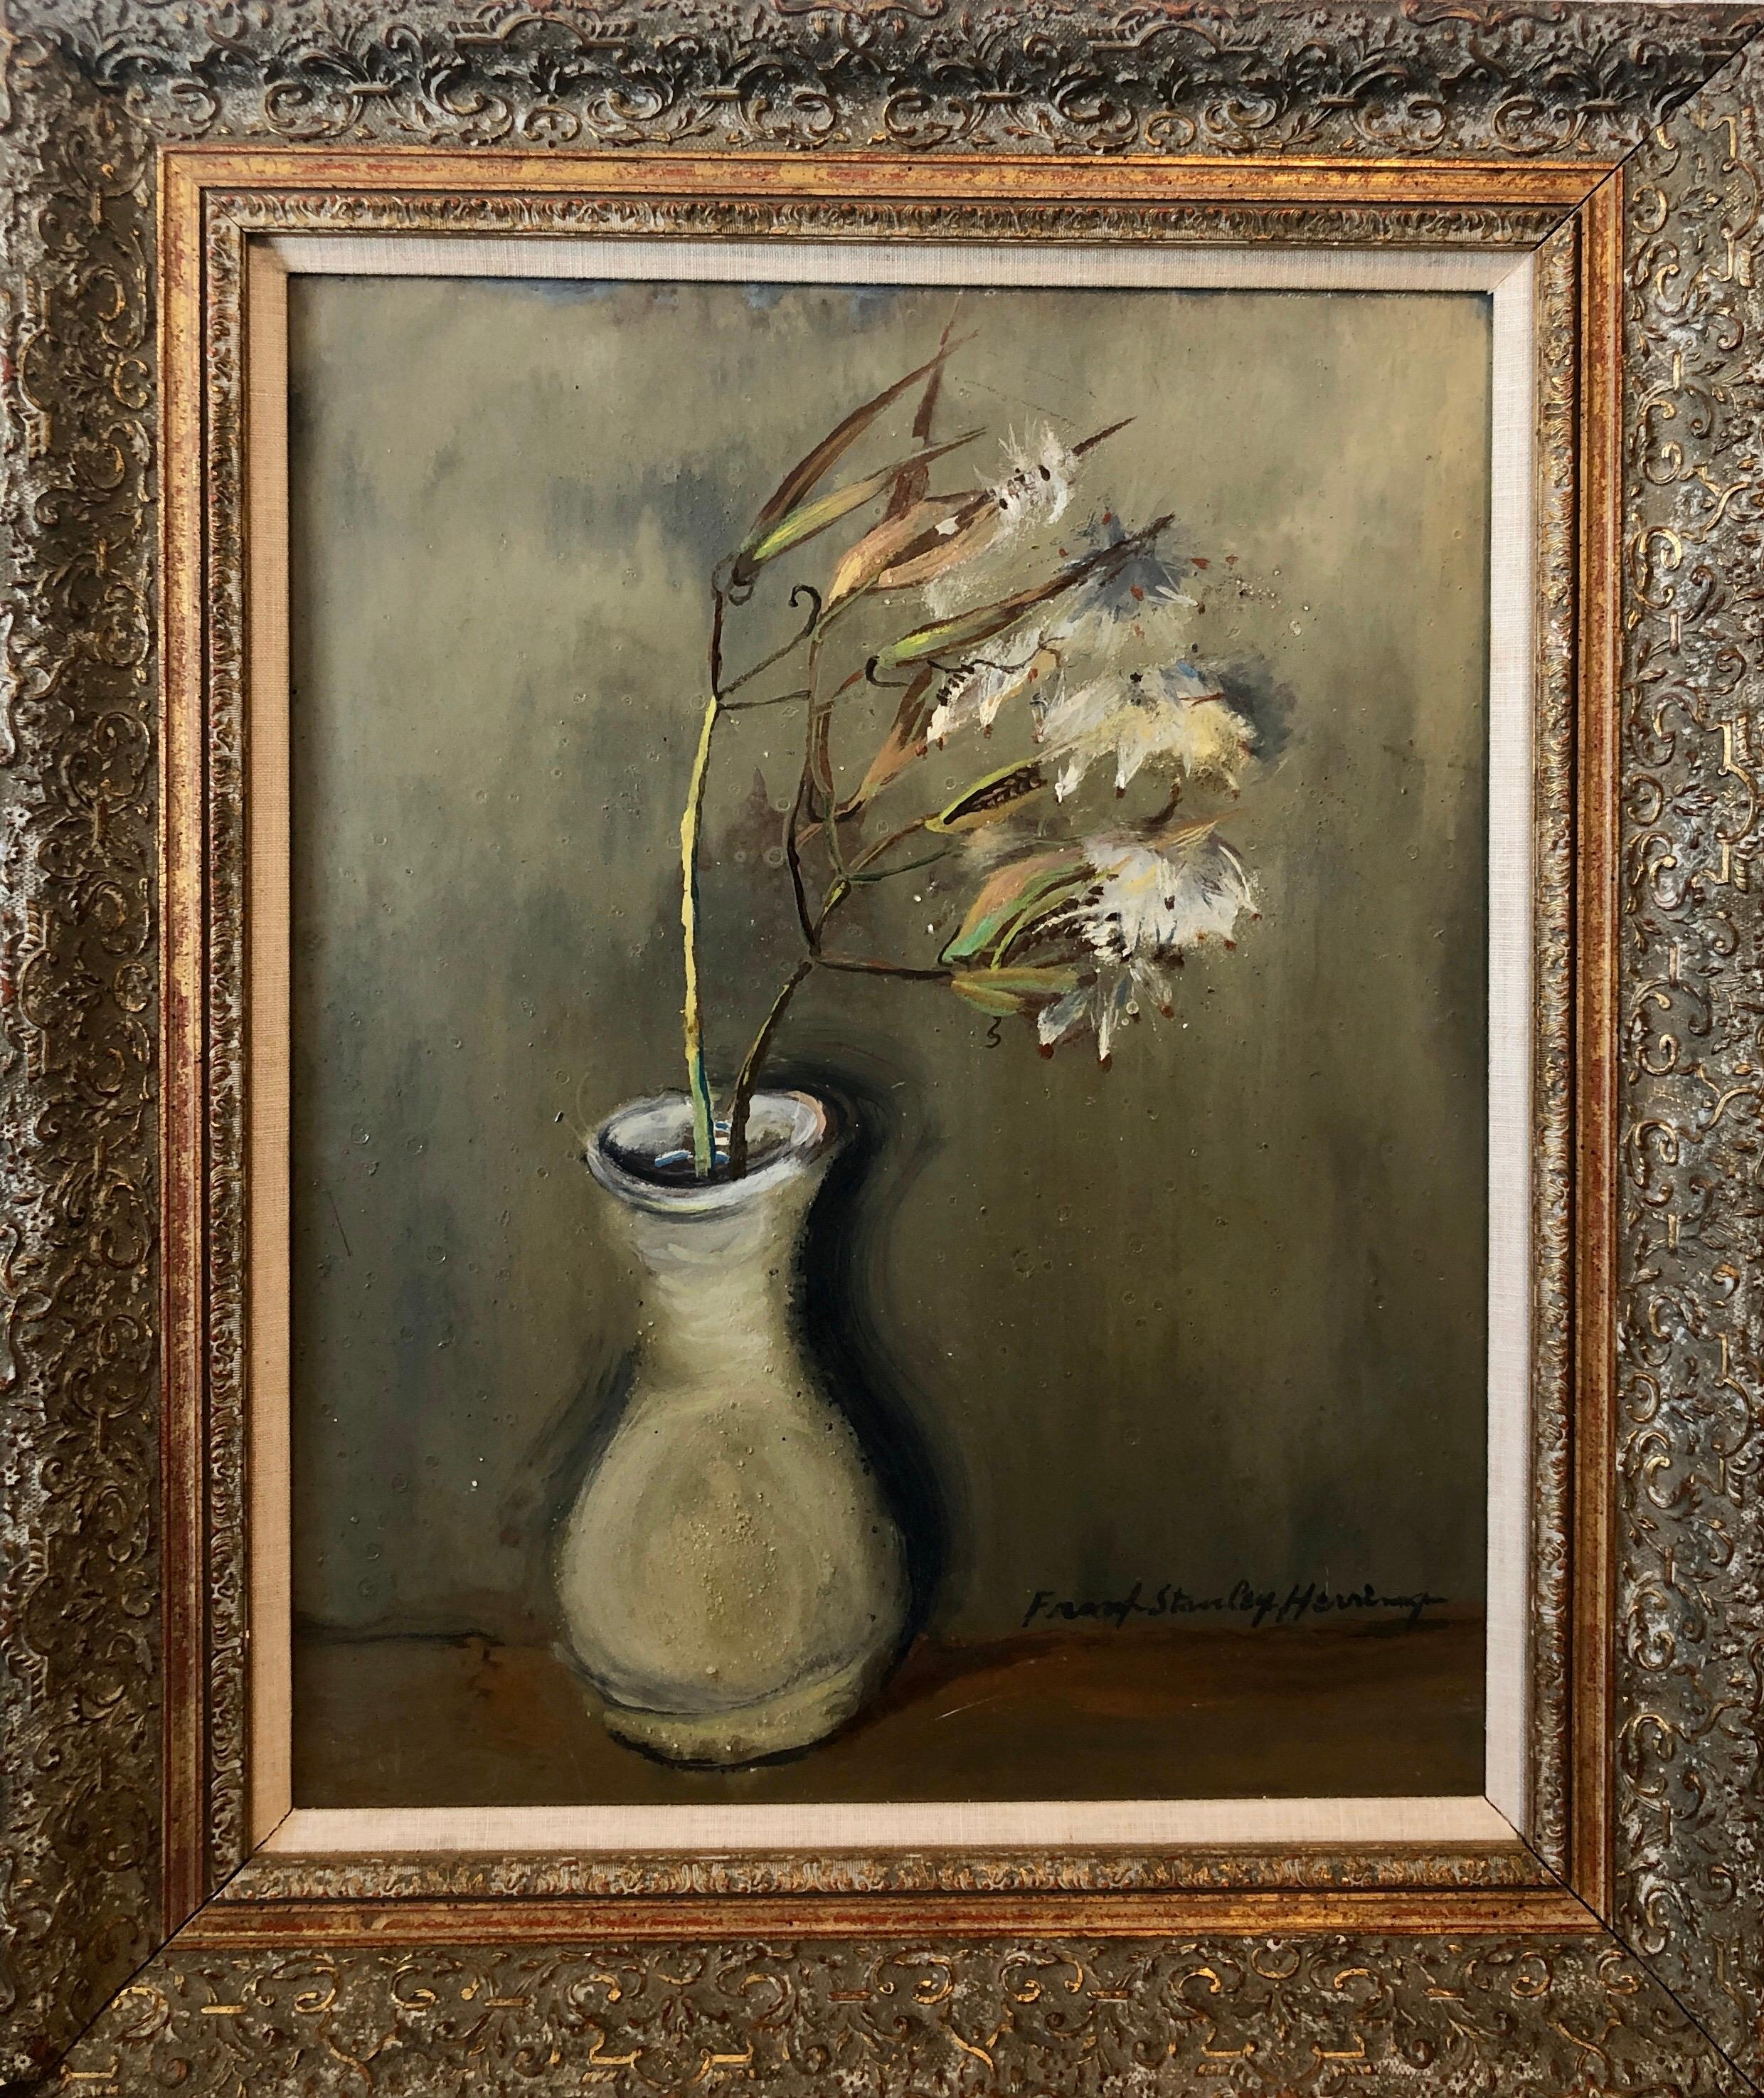 Modernist still life of flowers.
Oil on board  16 x 20 in., 22.25 x 26.25 inches framed.
signed lower right.

Frank Stanley Herring  (1894 - 1966)
Frank Stanley Herring was active/lived in Georgia, New York.  American artist Frank Herring is known